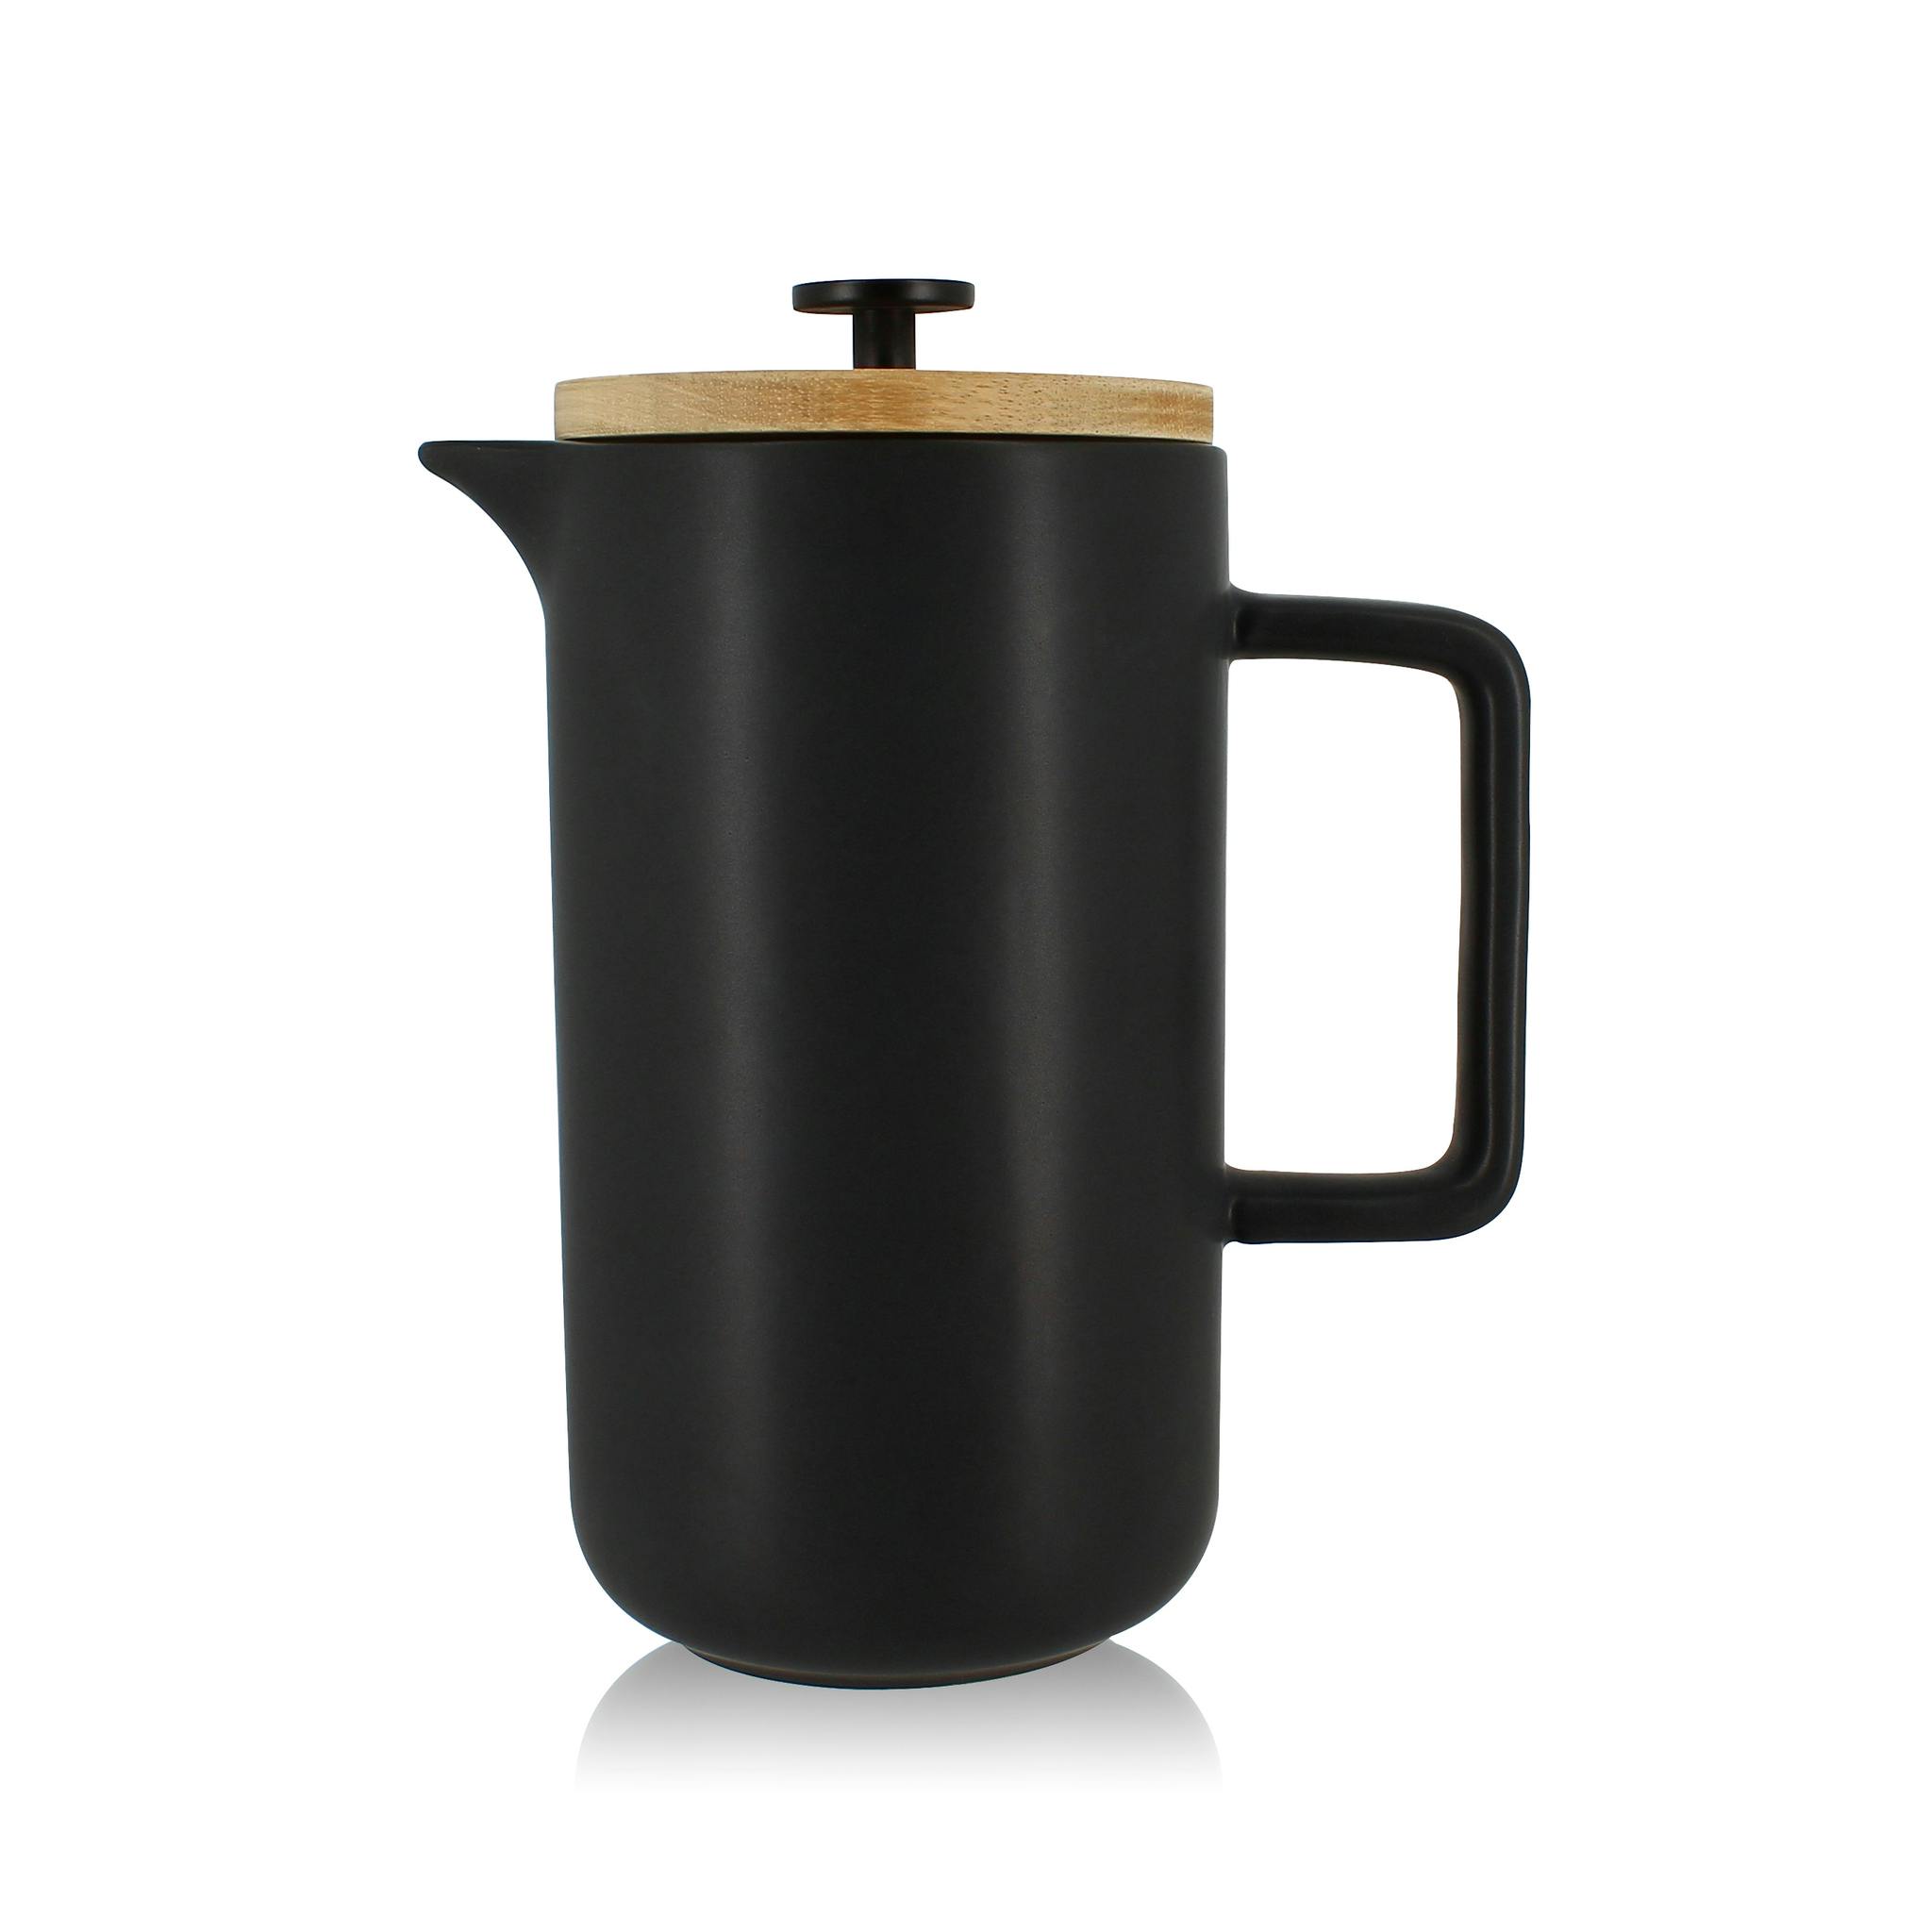 French press, coffee maker, plunger, stylish kitchen, coffee lovers, fresh coffee, cafetière